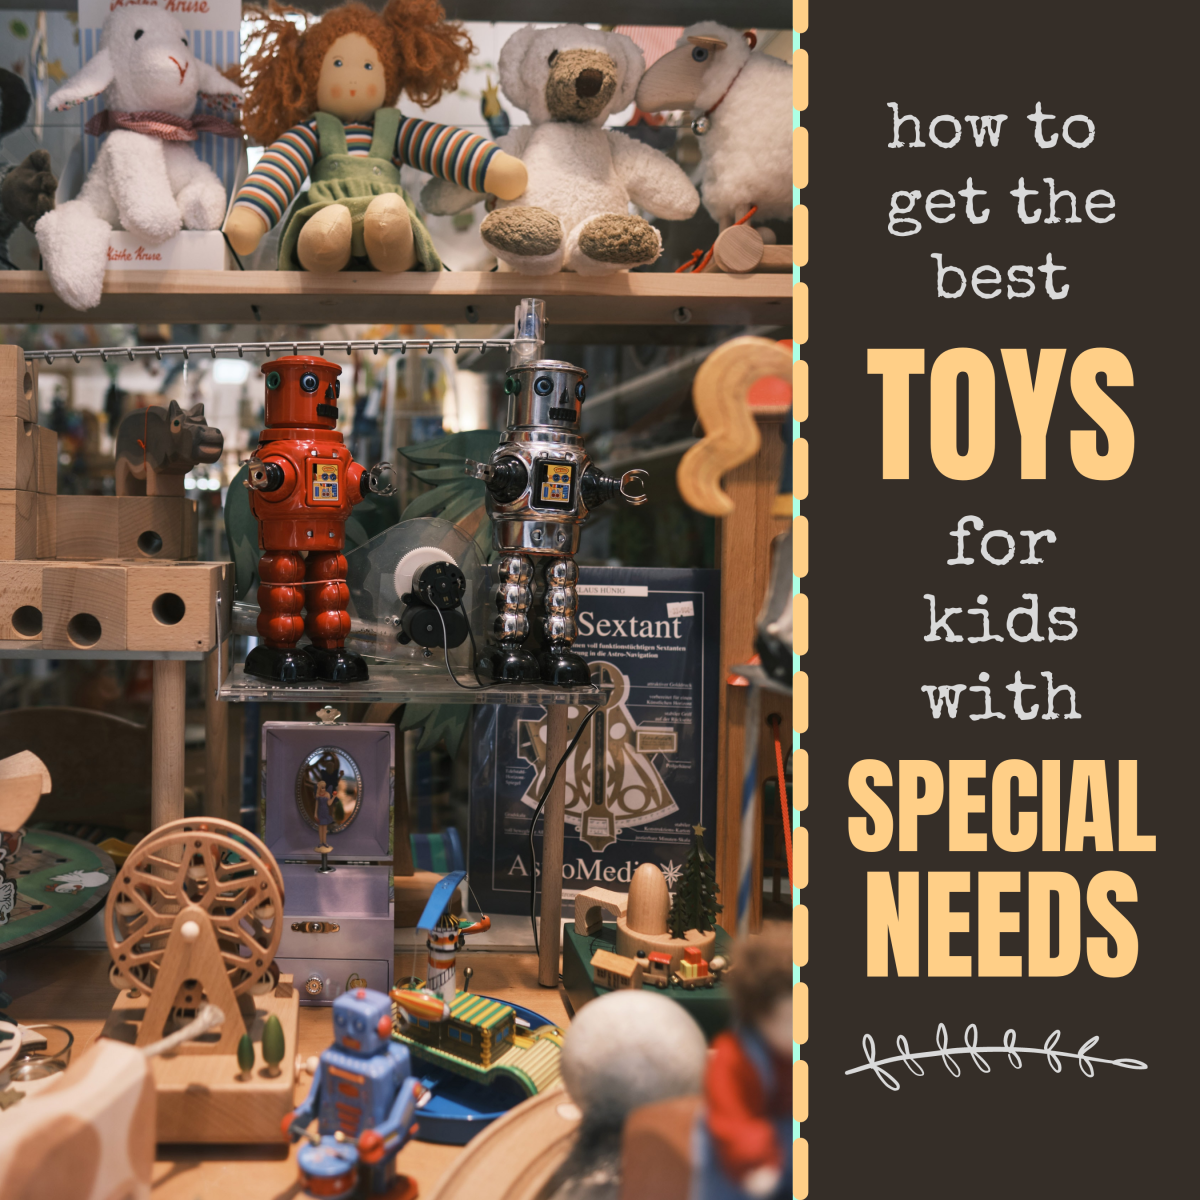 How to get the best toys for your special needs kid. 